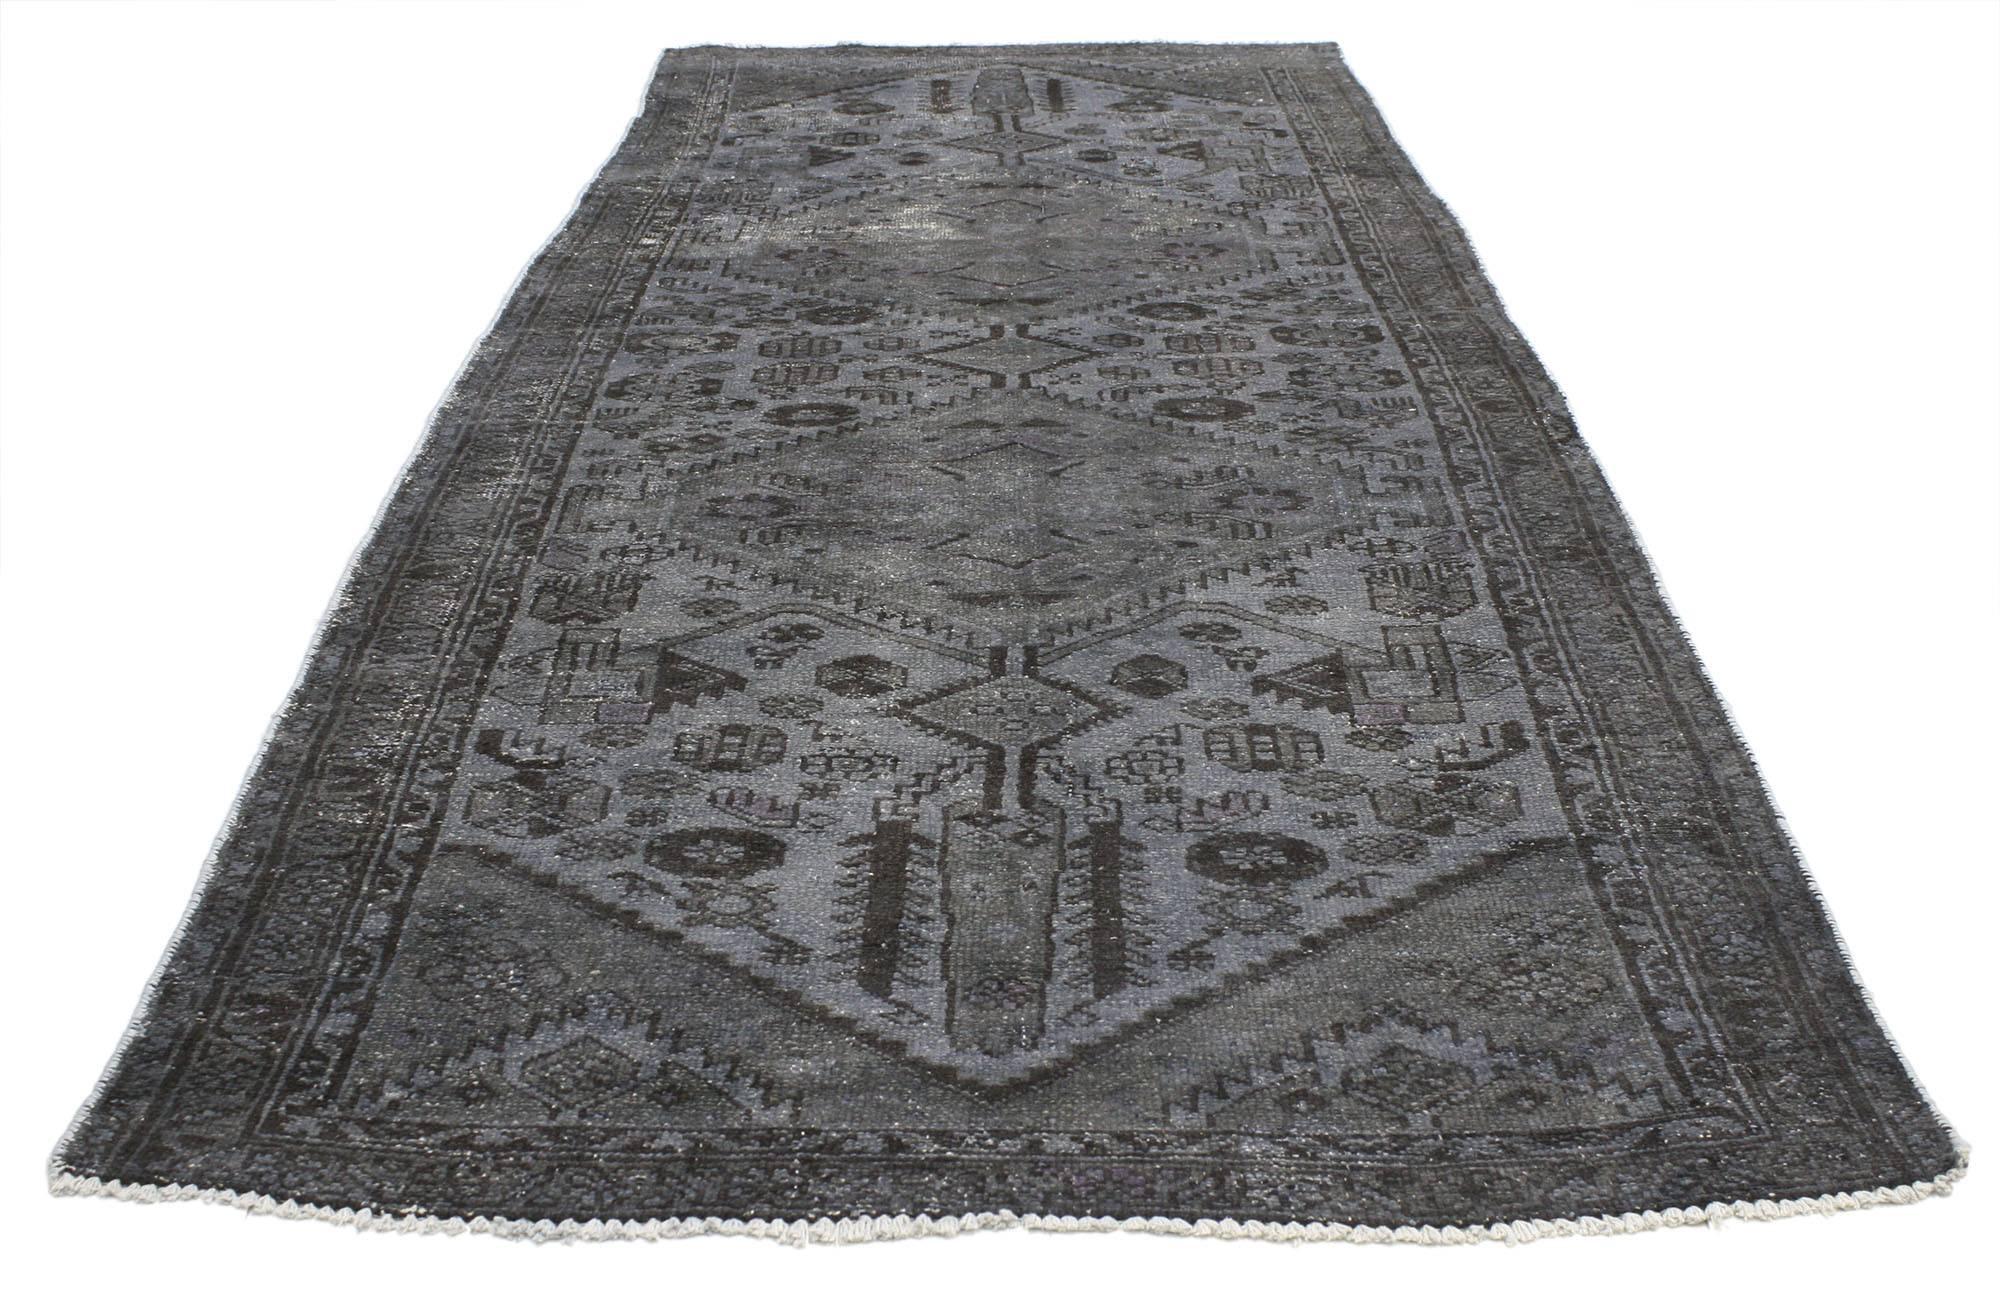 80422, distressed overdyed vintage Persian runner modern Industrial style. This distressed overdyed vintage Persian runner features a modern Industrial style. Characterized by two serrated style medallions with a geometric design and overdyed in